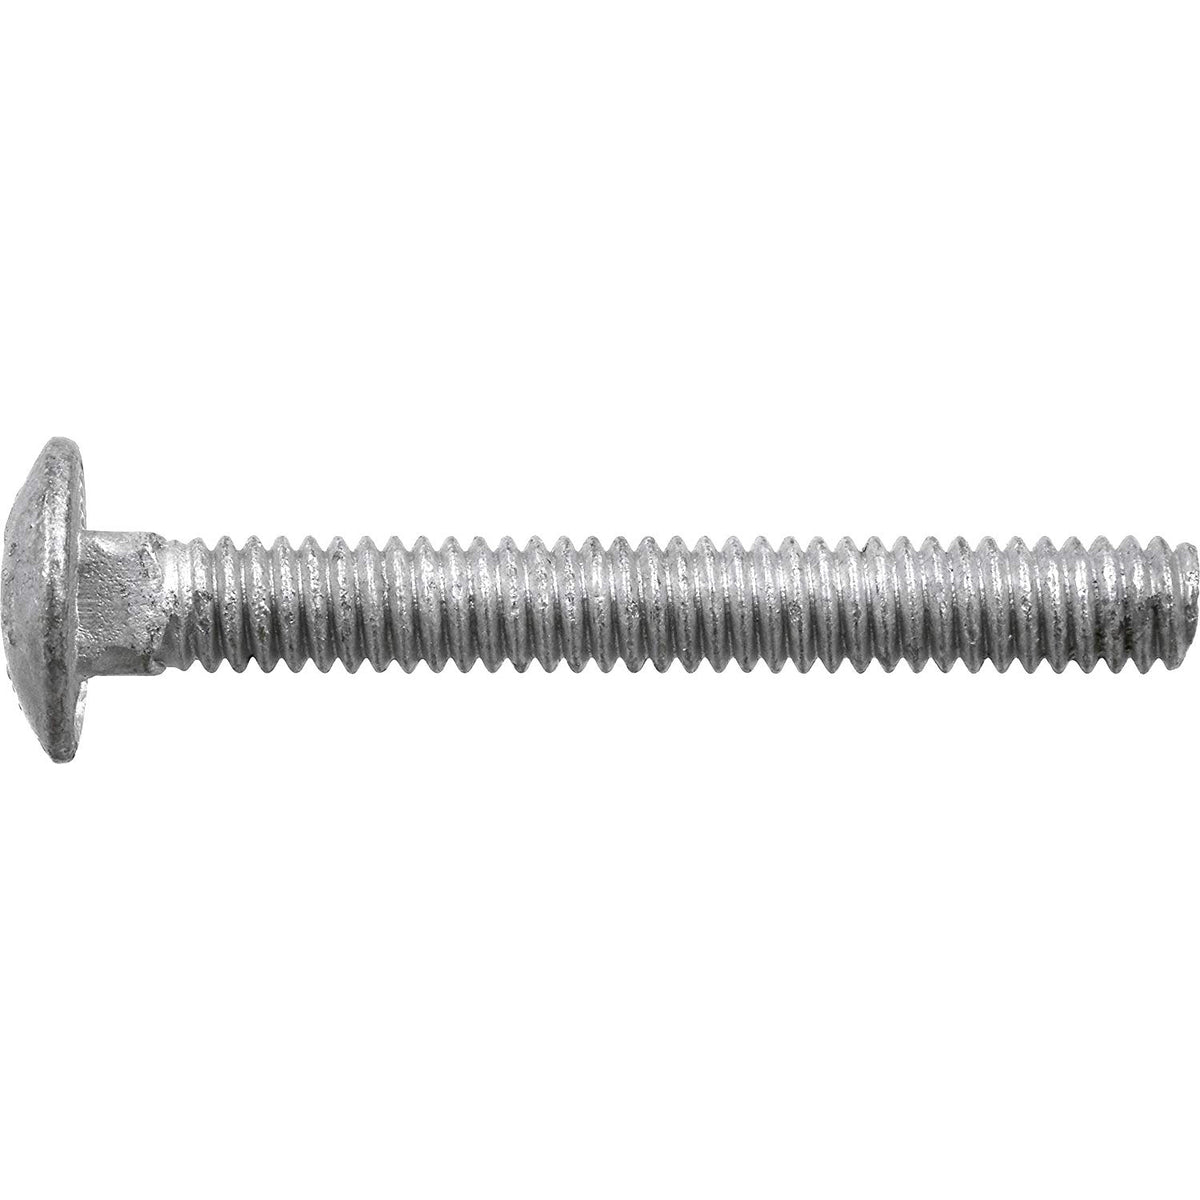 Hillman 812551 Flat Head Carriage Bolts, Galvanized, 5/16" x 3", 100-Count